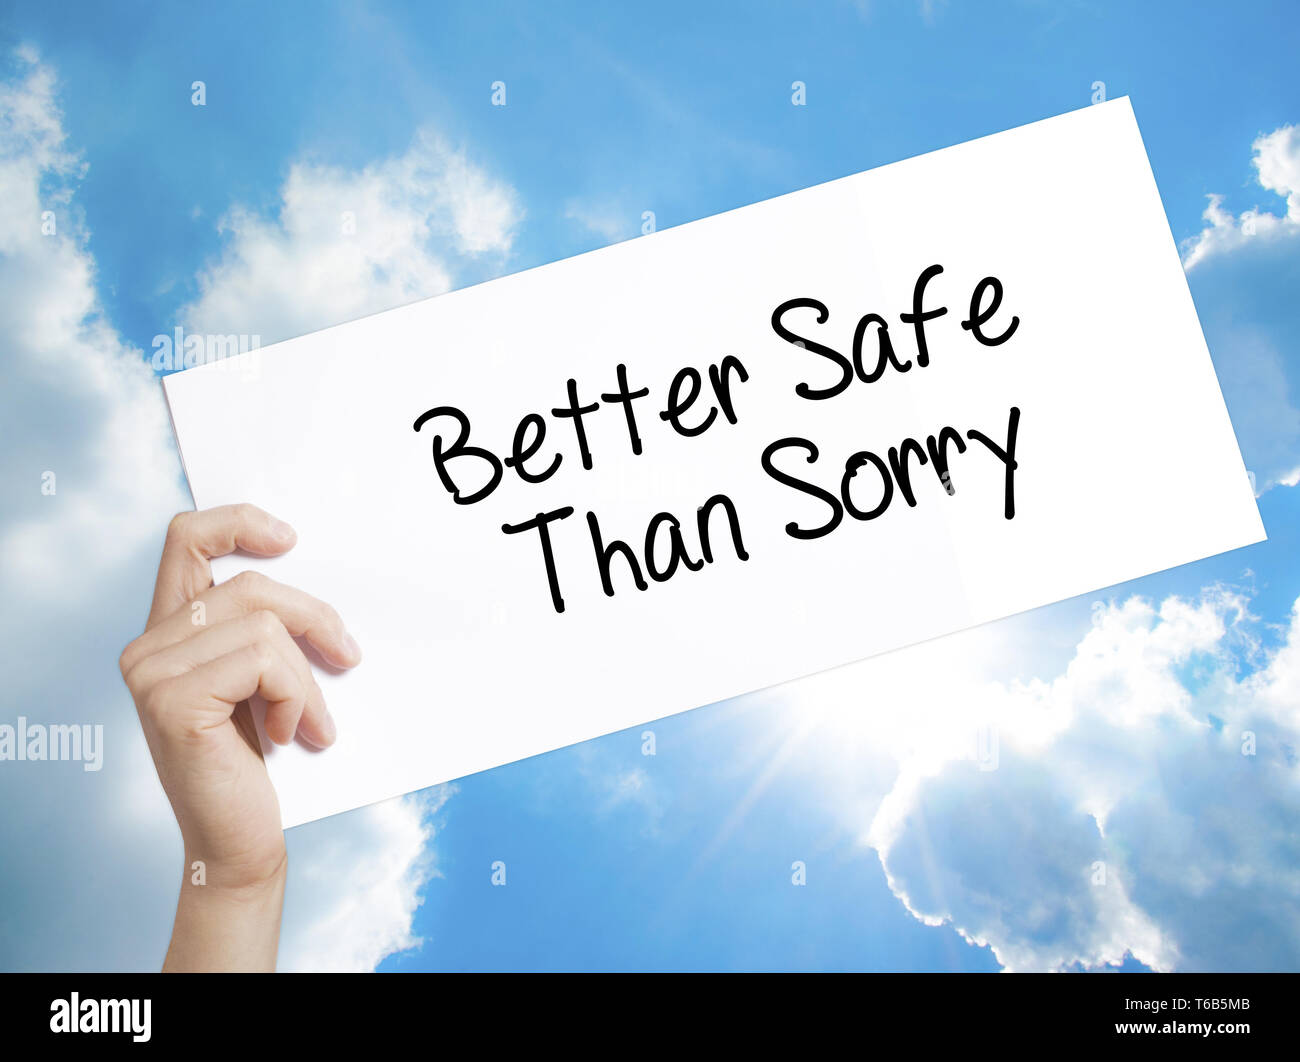 Better Safe Than Sorry Sign On White Paper Man Hand Holding Paper With